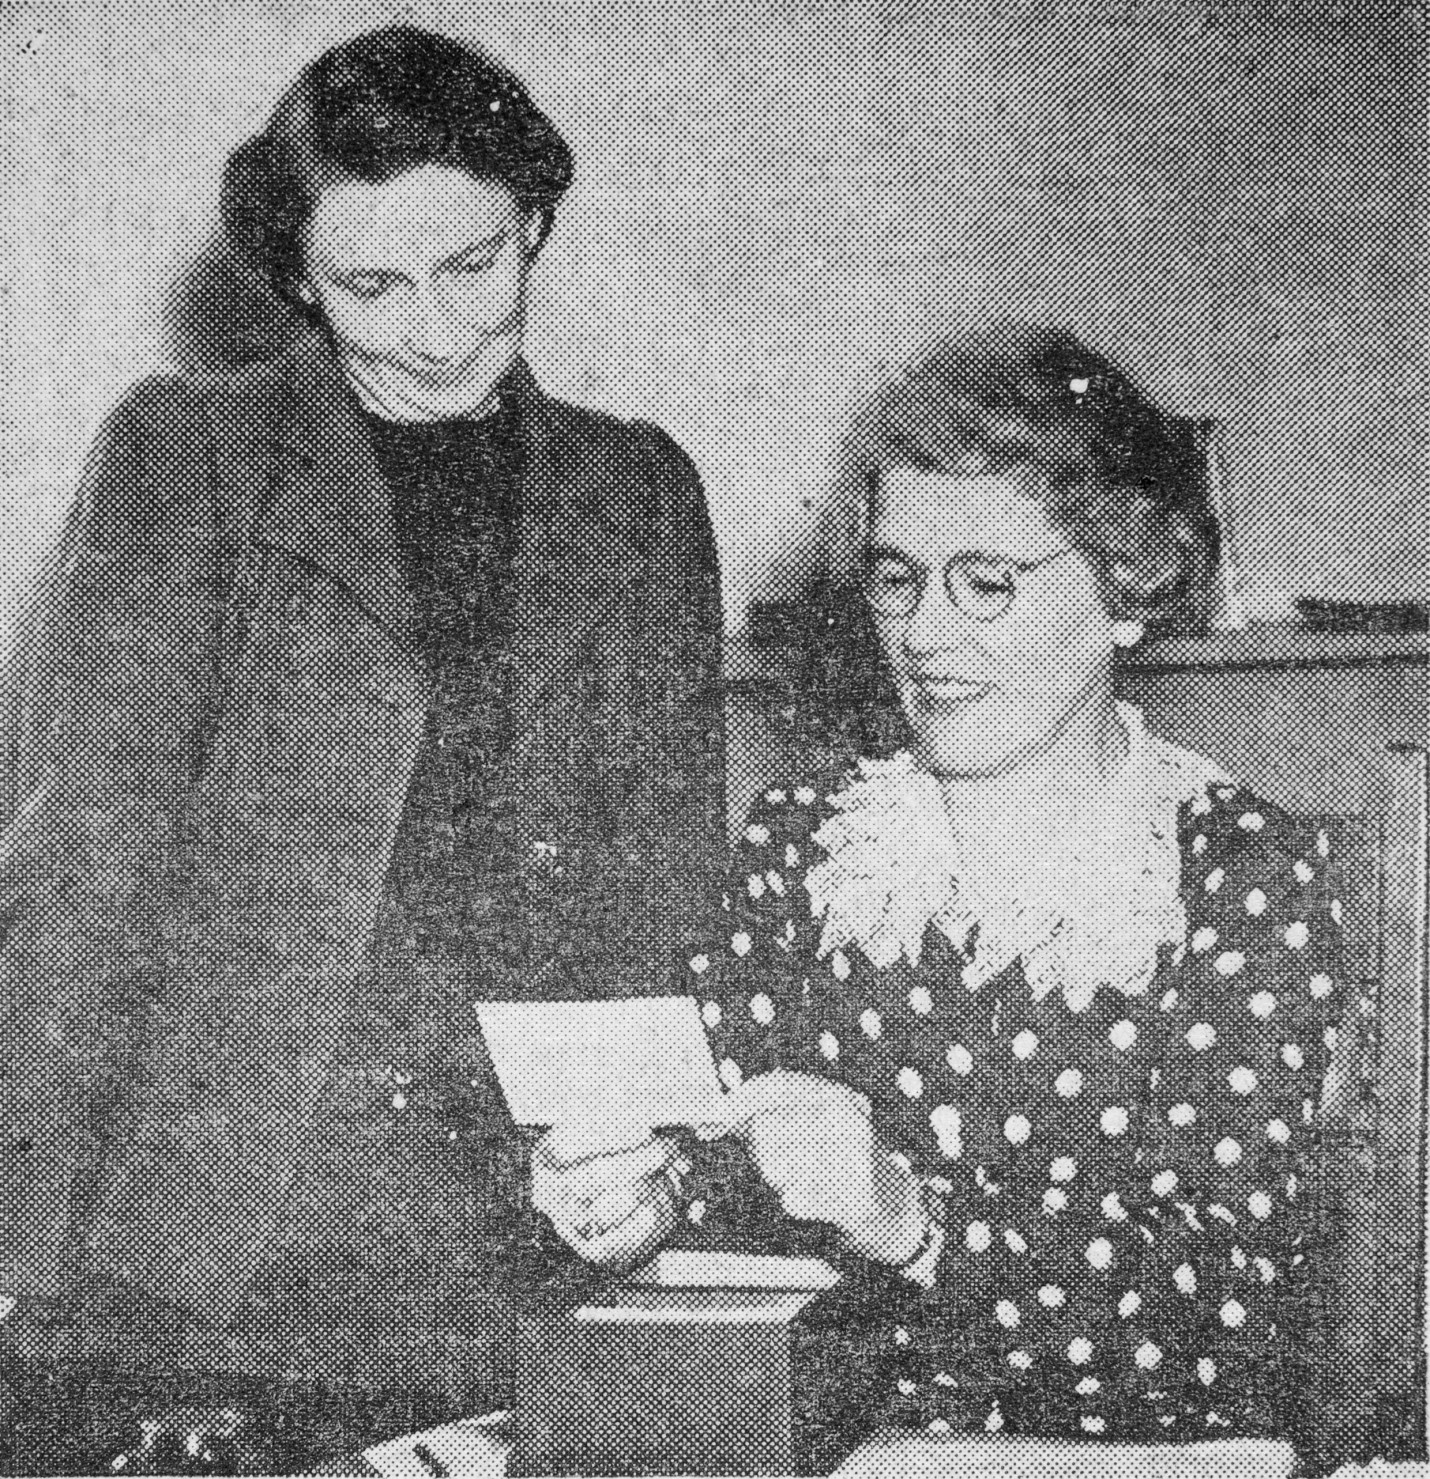 Jocelyn Hyslop (right) at the time of her resignation from the position of Director of Social Studies in 1944 pictured with her successor Ruth Hoban (LSE Social Science Certificate 1939) illustrating her systematic approach to the study of social work and her commitment to social science as they examine a card index system [12] .